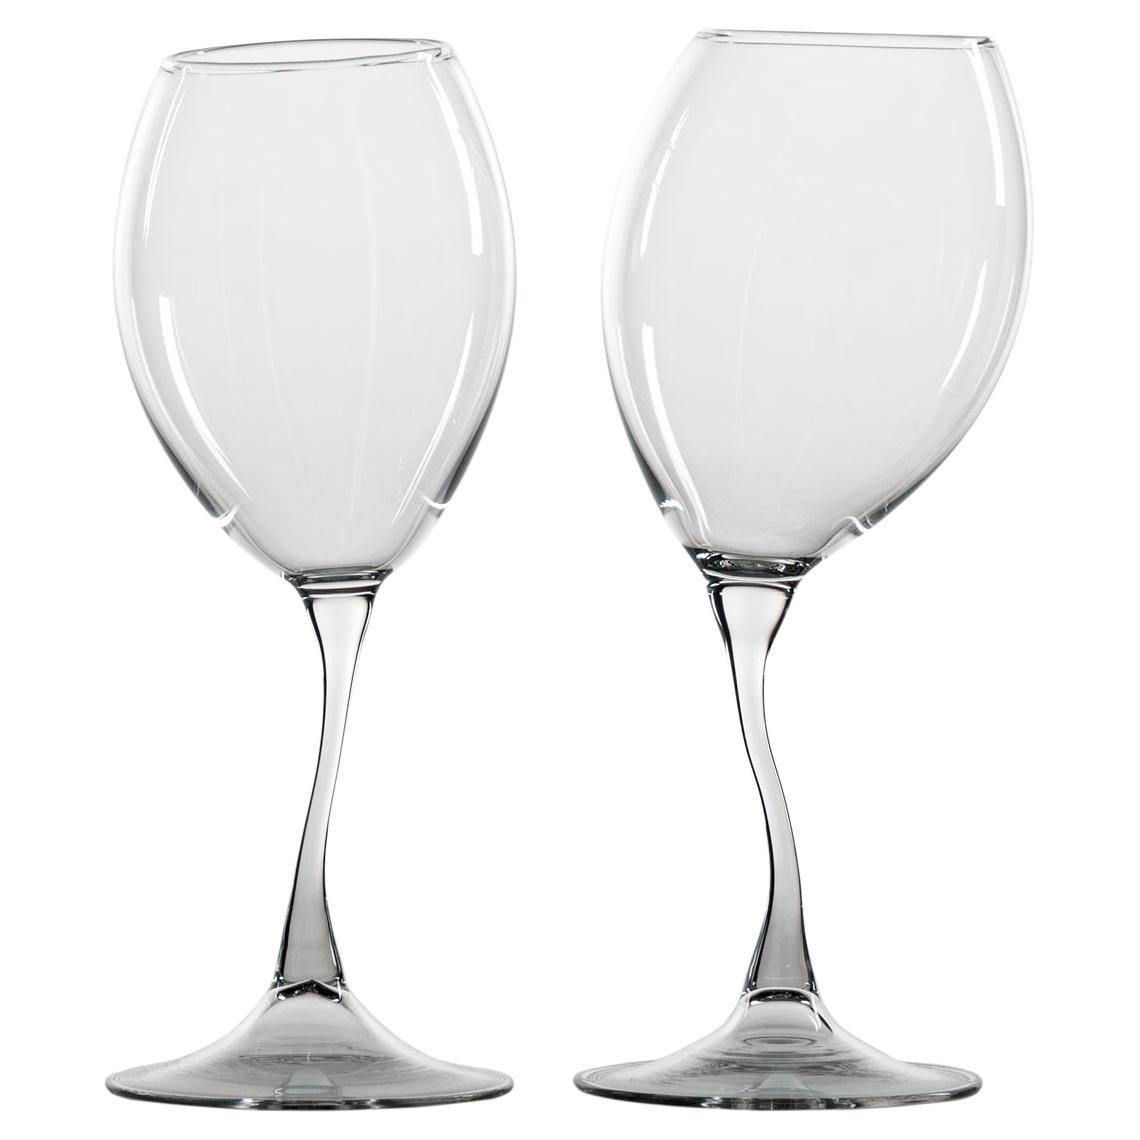 "A Pair of Storti Wine Glasses" Hand Blown Glasses by Simone Crestani